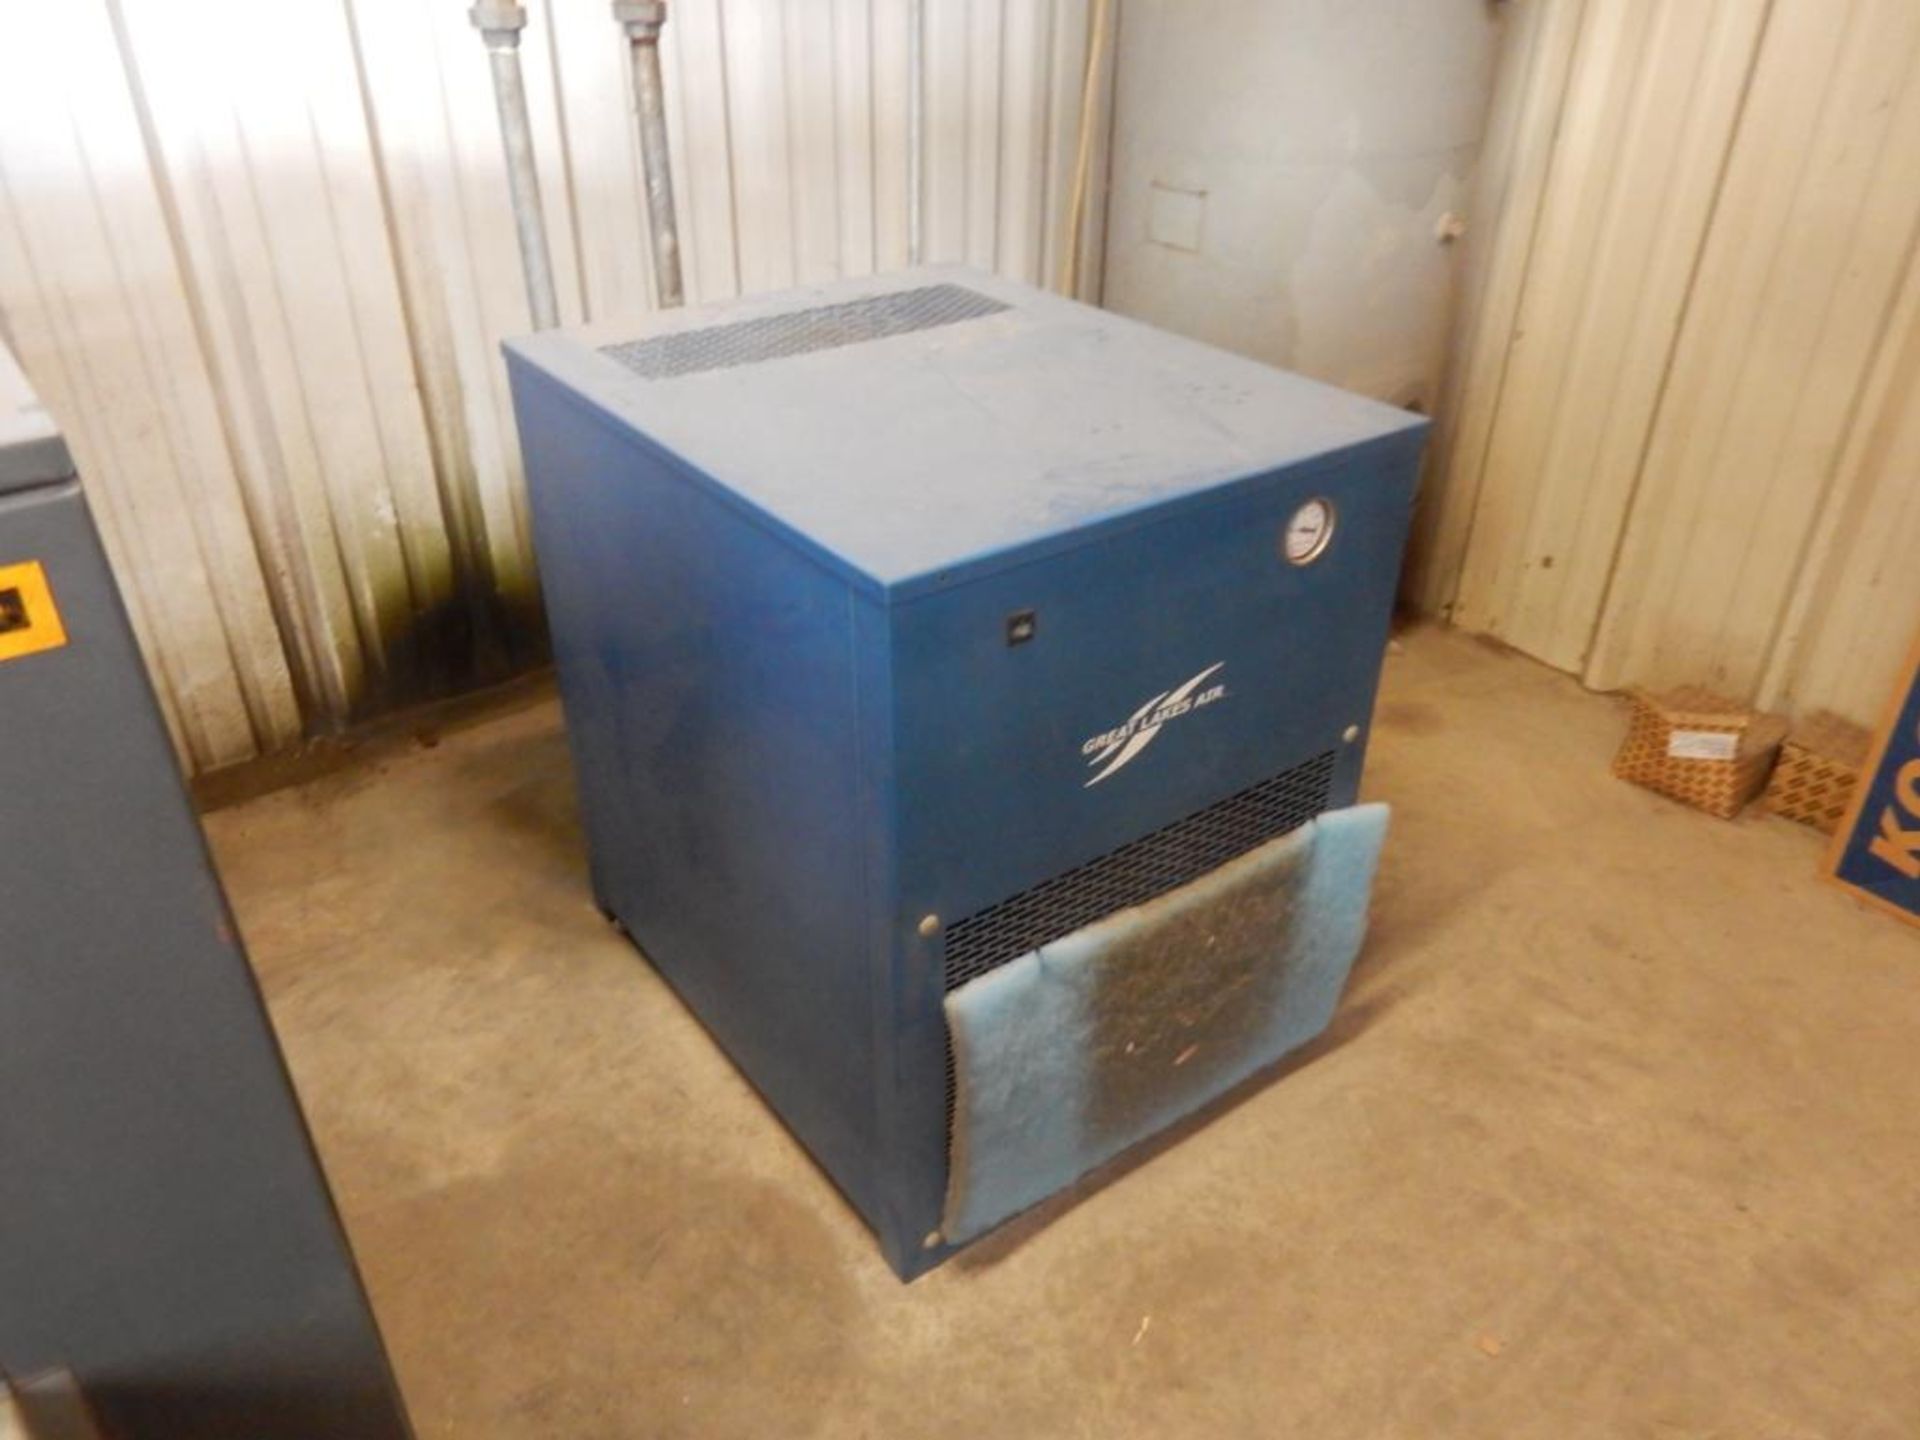 GREAT LAKES AIR, REFRIGERATED AIR DRYER, M# GRF-125A-216, S/N 31400, 2007